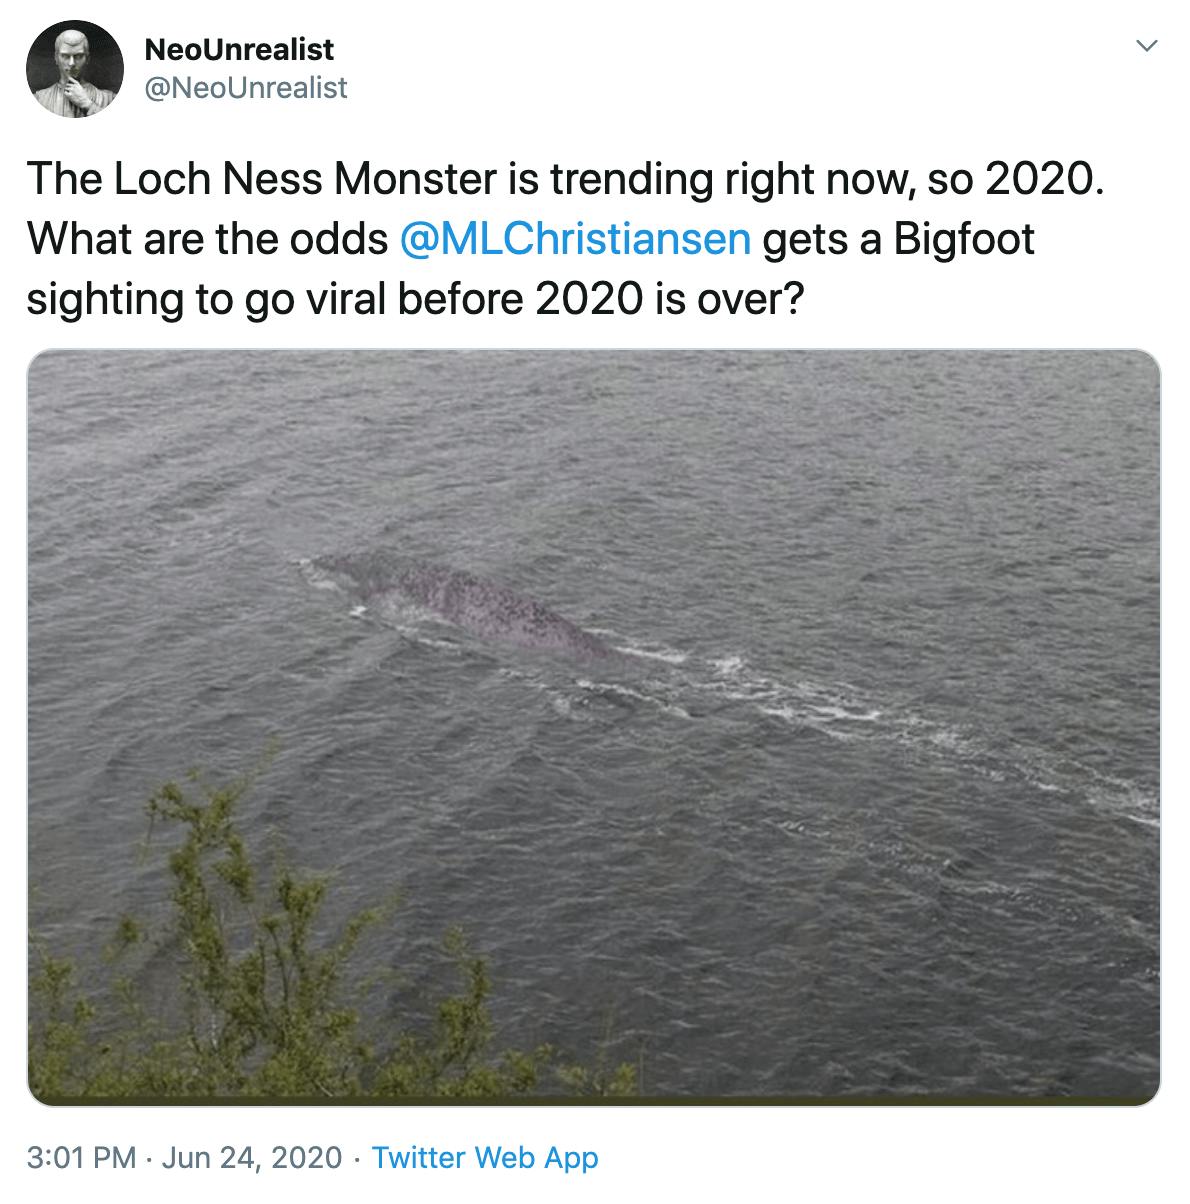 The Loch Ness Monster is trending right now, so 2020. What are the odds  @MLChristiansen  gets a Bigfoot sighting to go viral before 2020 is over?